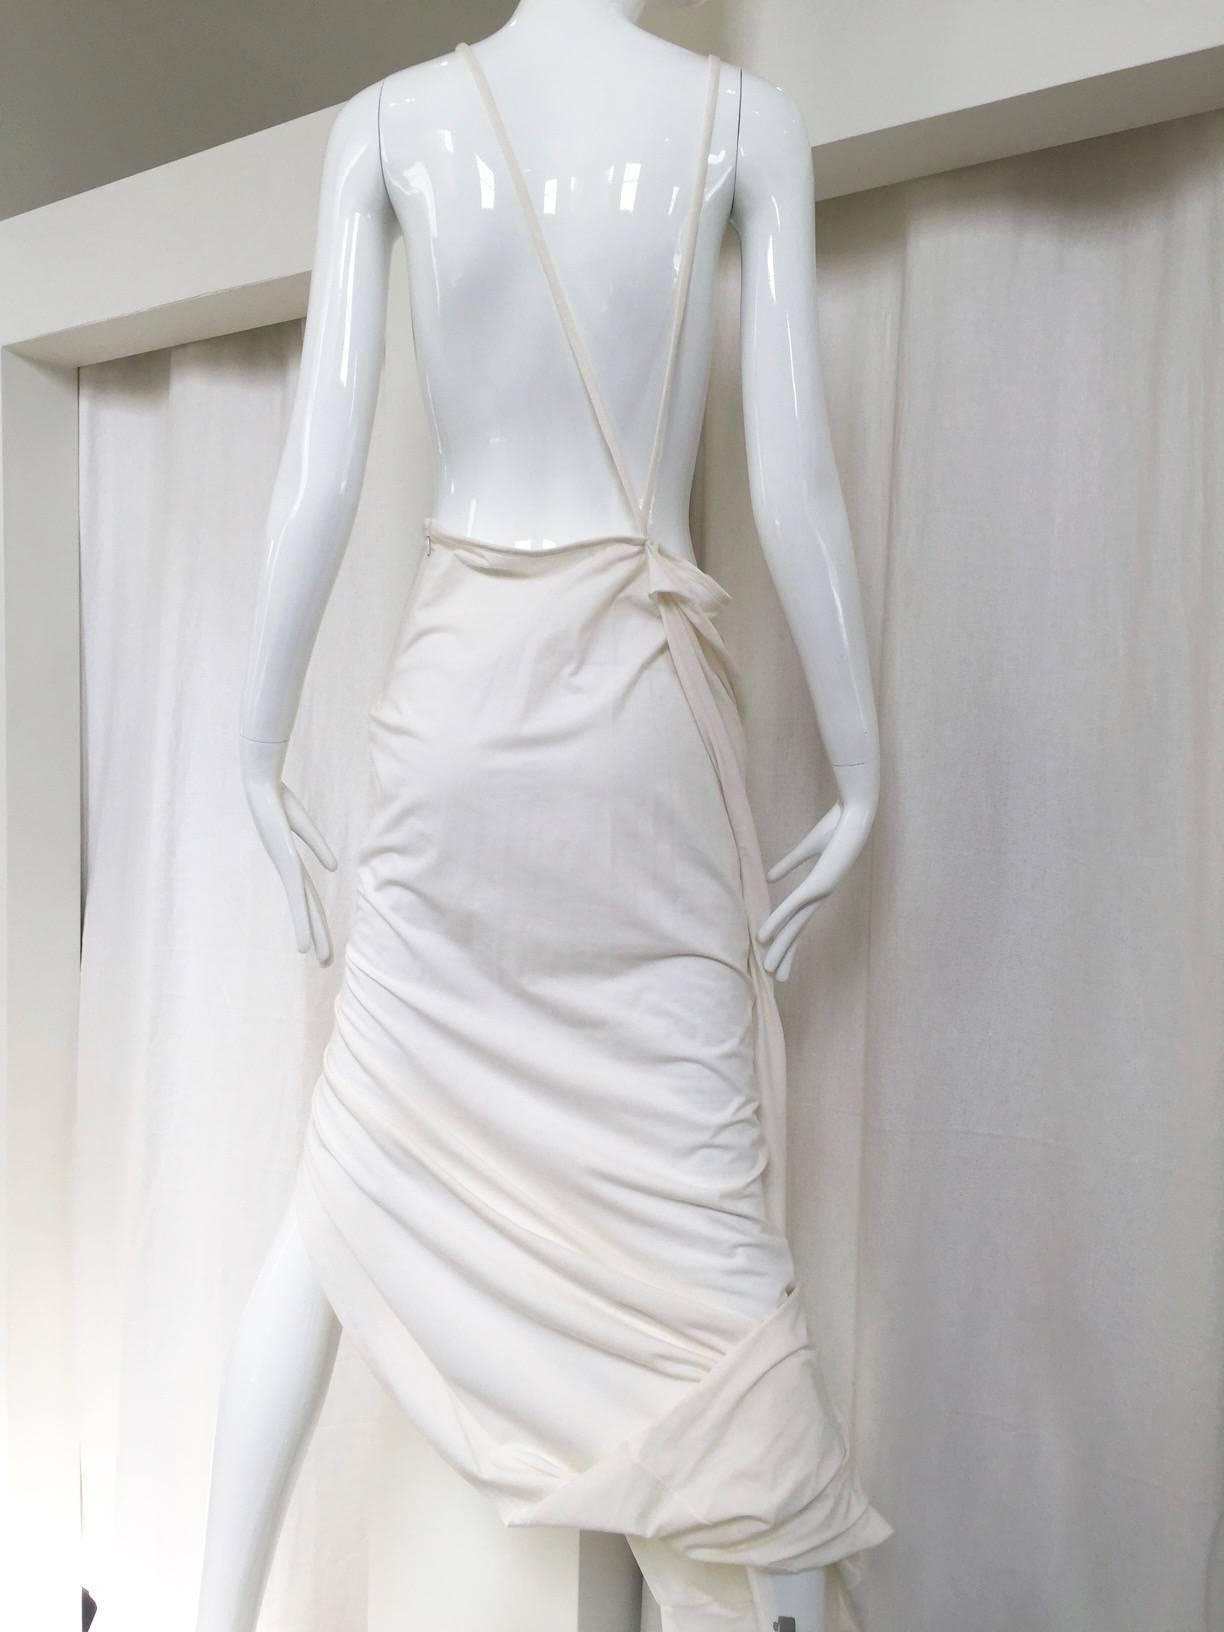 Gray Important 2005 Helmut Lang last collection- white knit dress